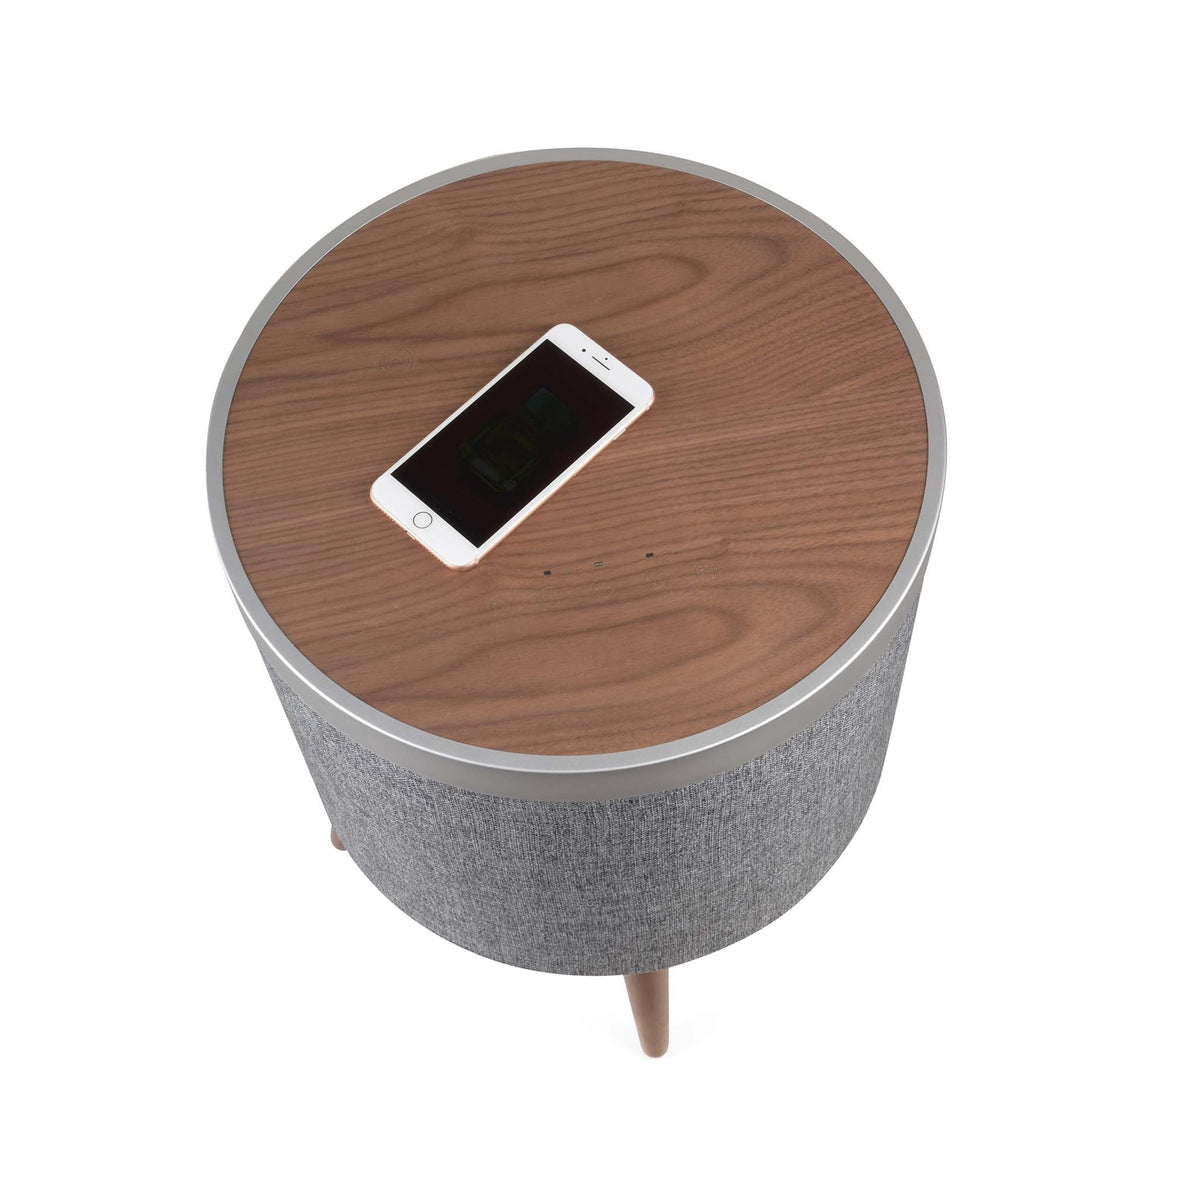 Zain Grey Scandi Style Wireless Smart Side Lamp Table with Speaker and Subwoofer